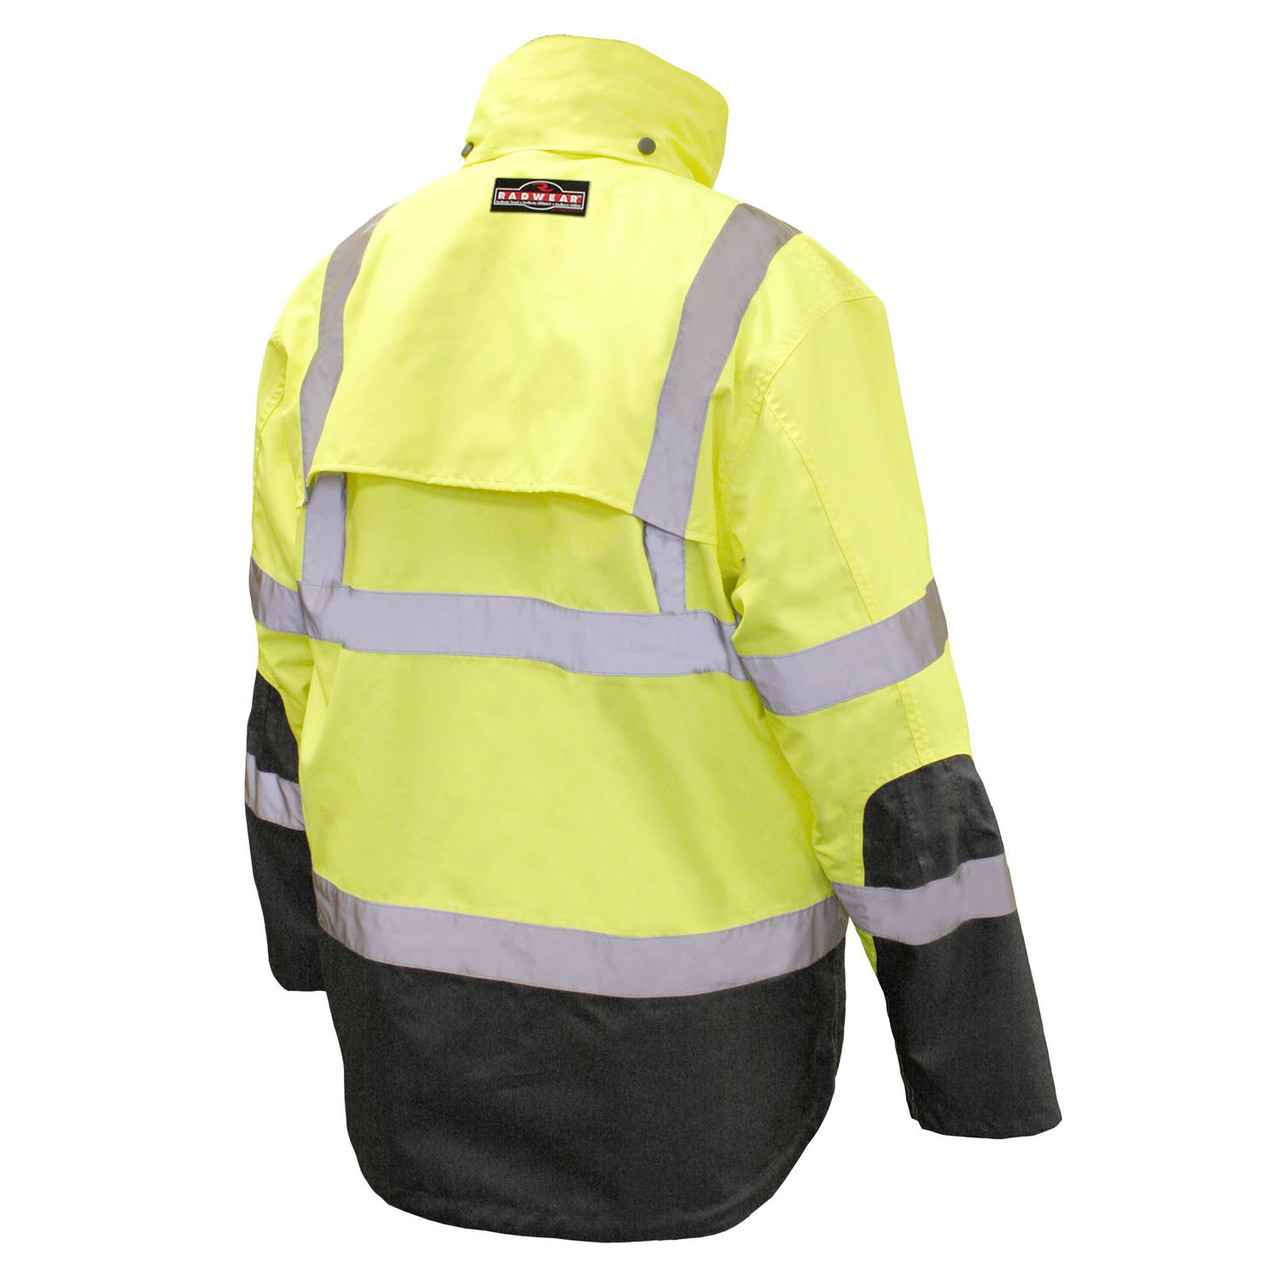 Three-in-One Hi-Vis Weatherproof Parka with Pass Through for Fall Protection and Fleece Lining